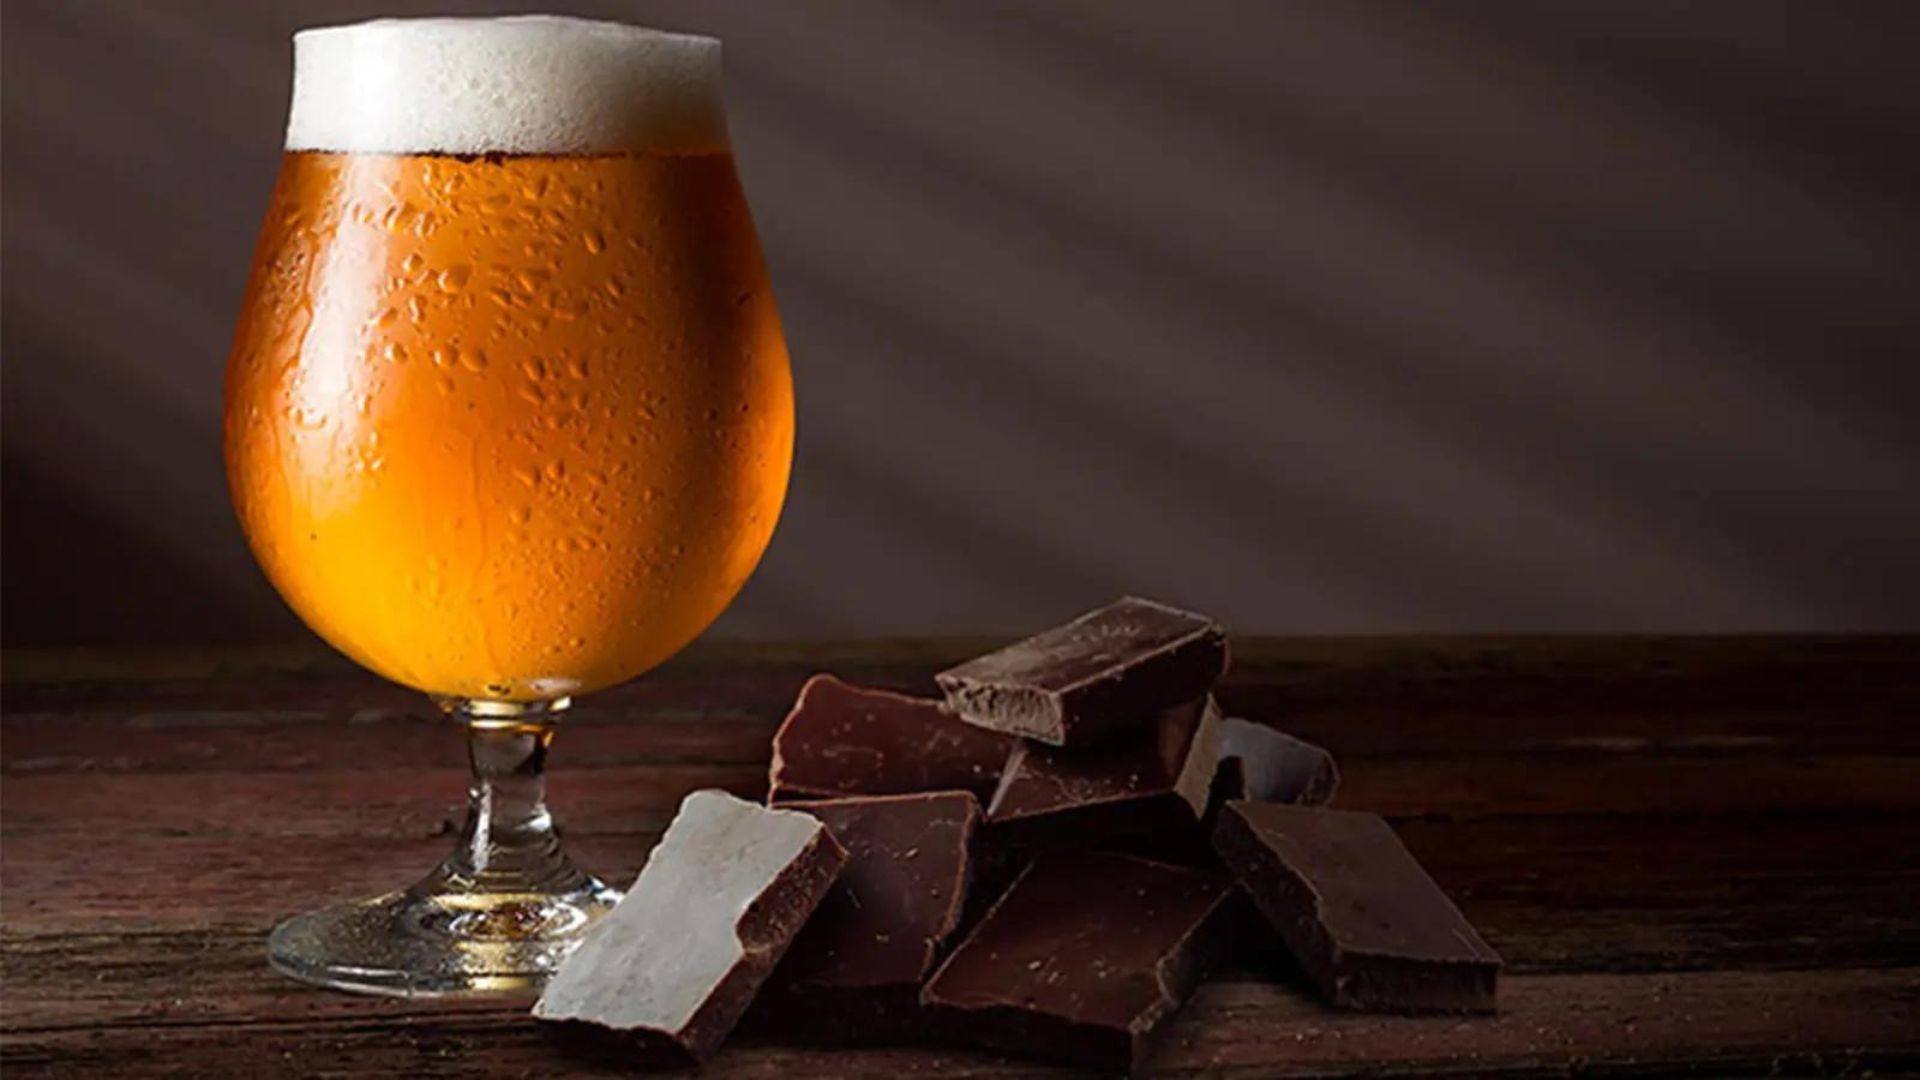 this image shows Beer and Chocolate Pairing